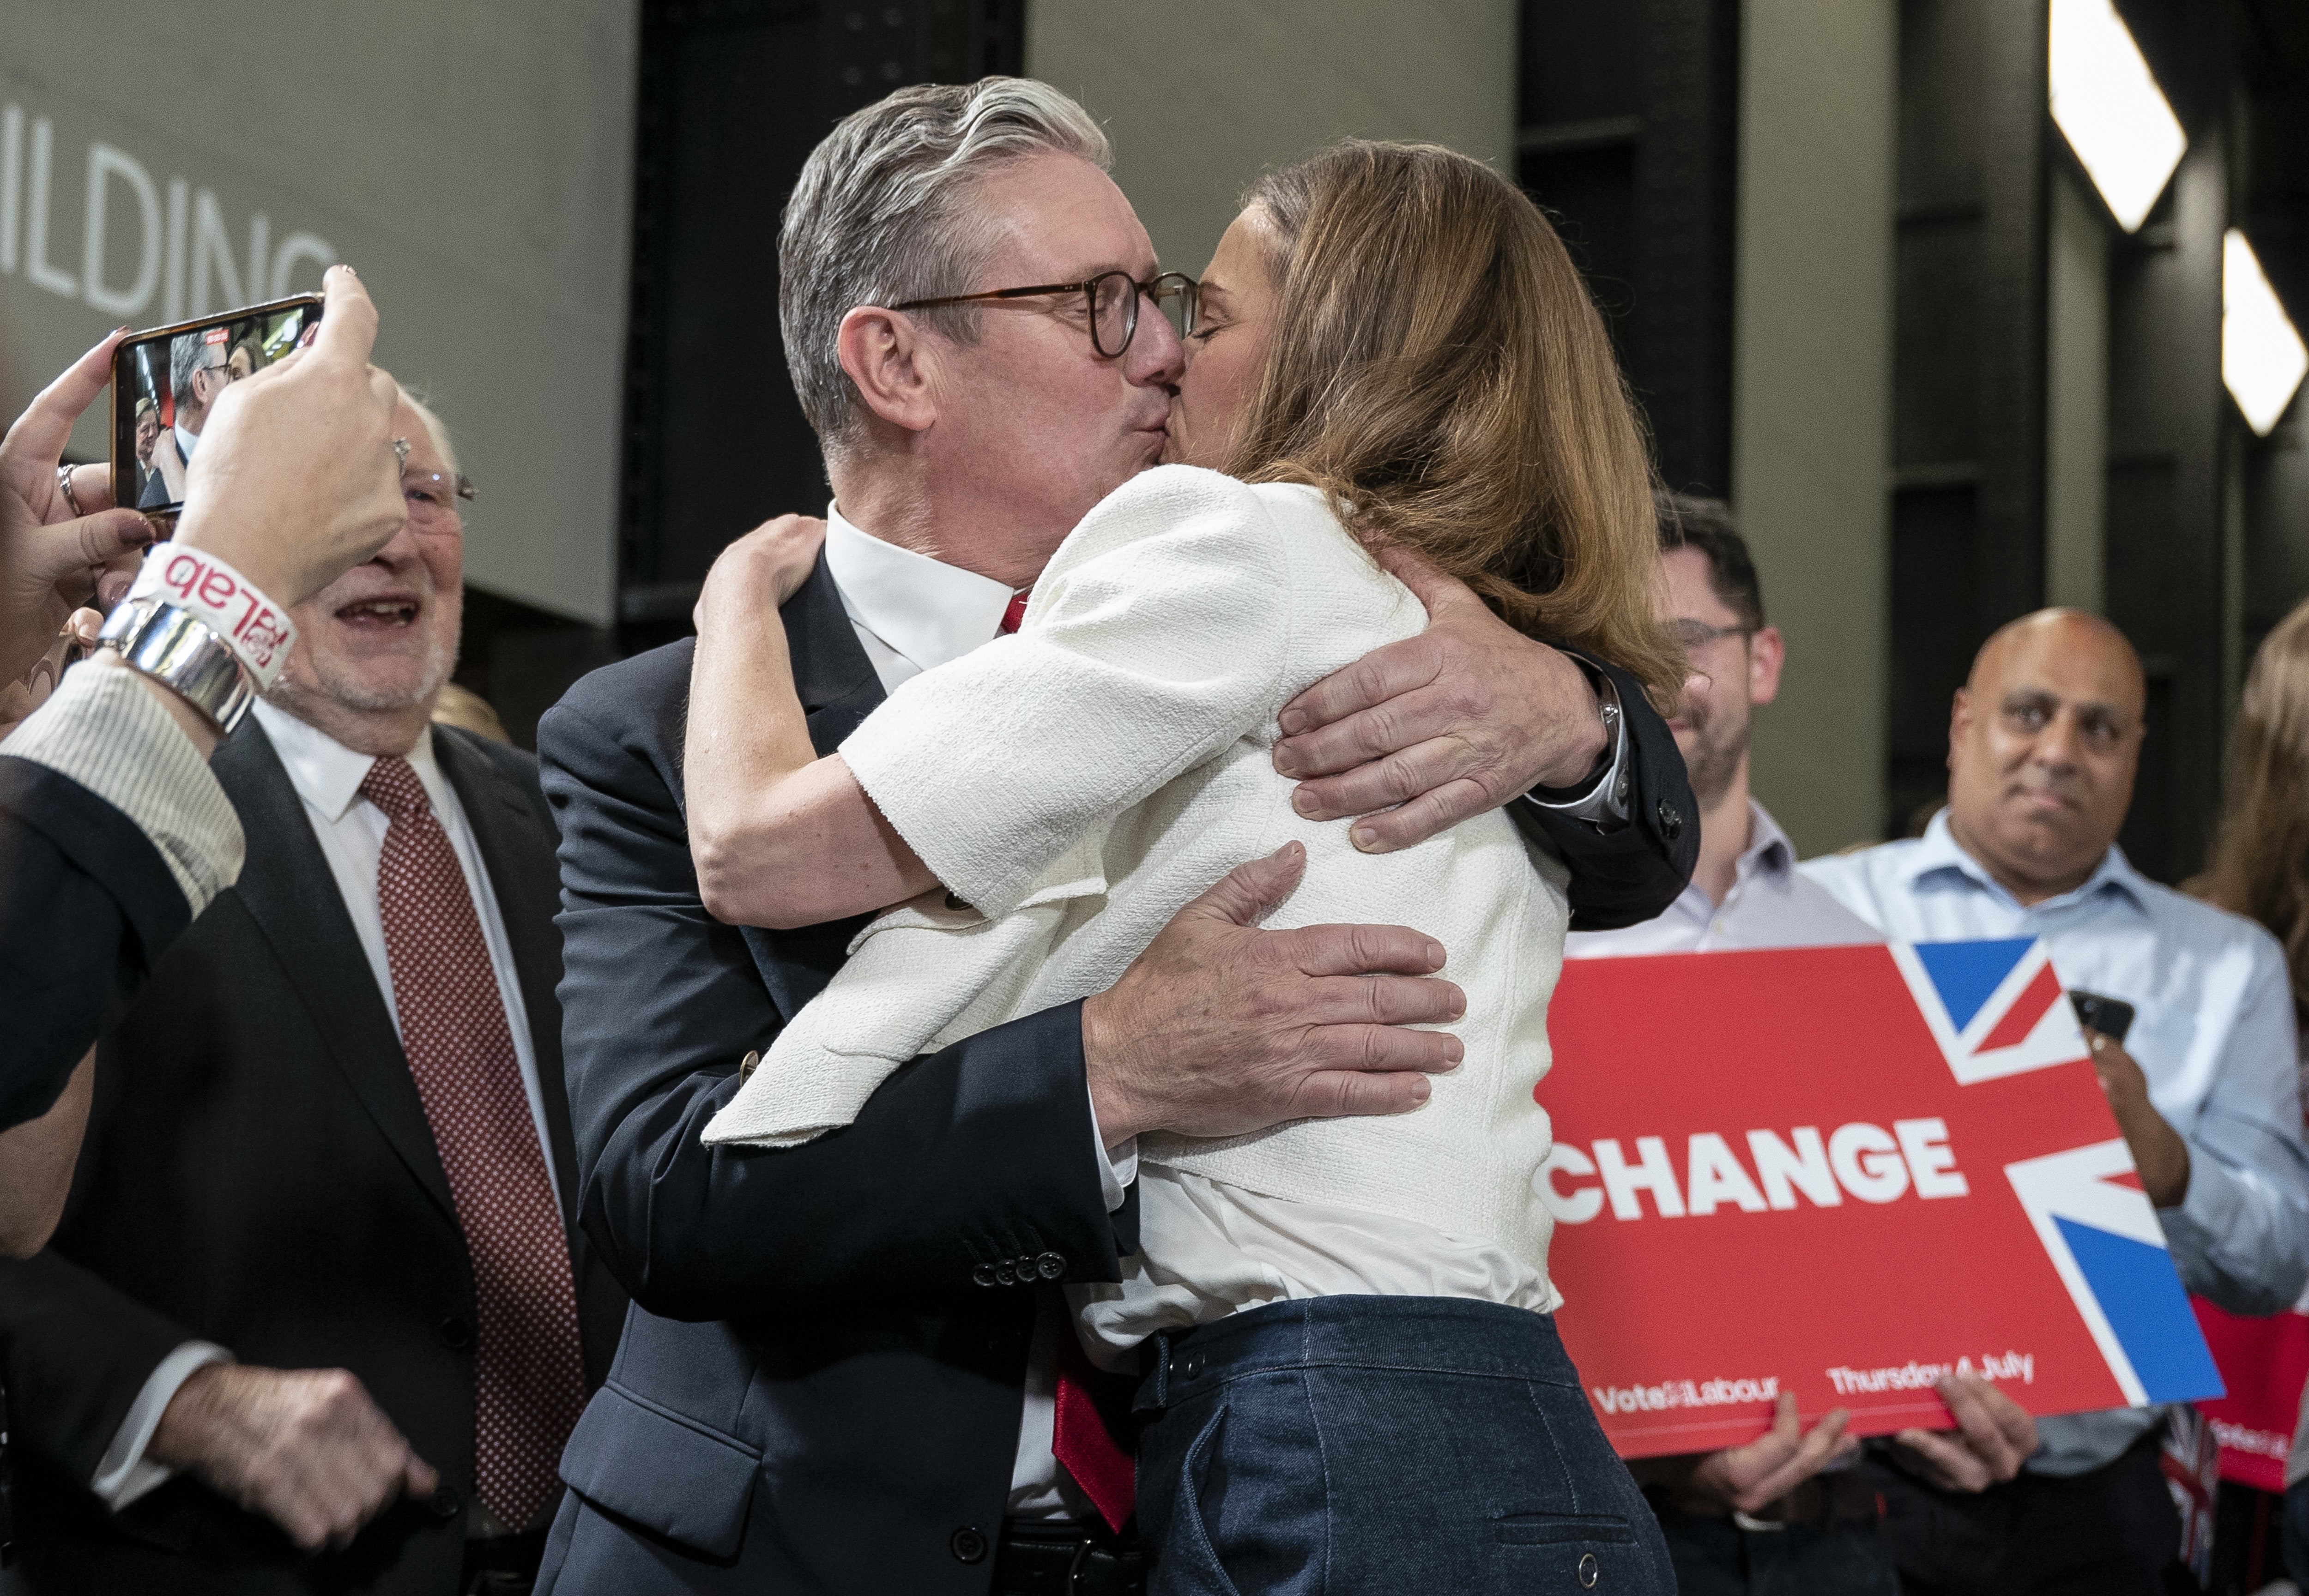 Sir Keir Starmer embraces his wife, Victoria, in front of cheering crowds in the Tate Modern’s Turbine Hall (Jeff Moore/PA)